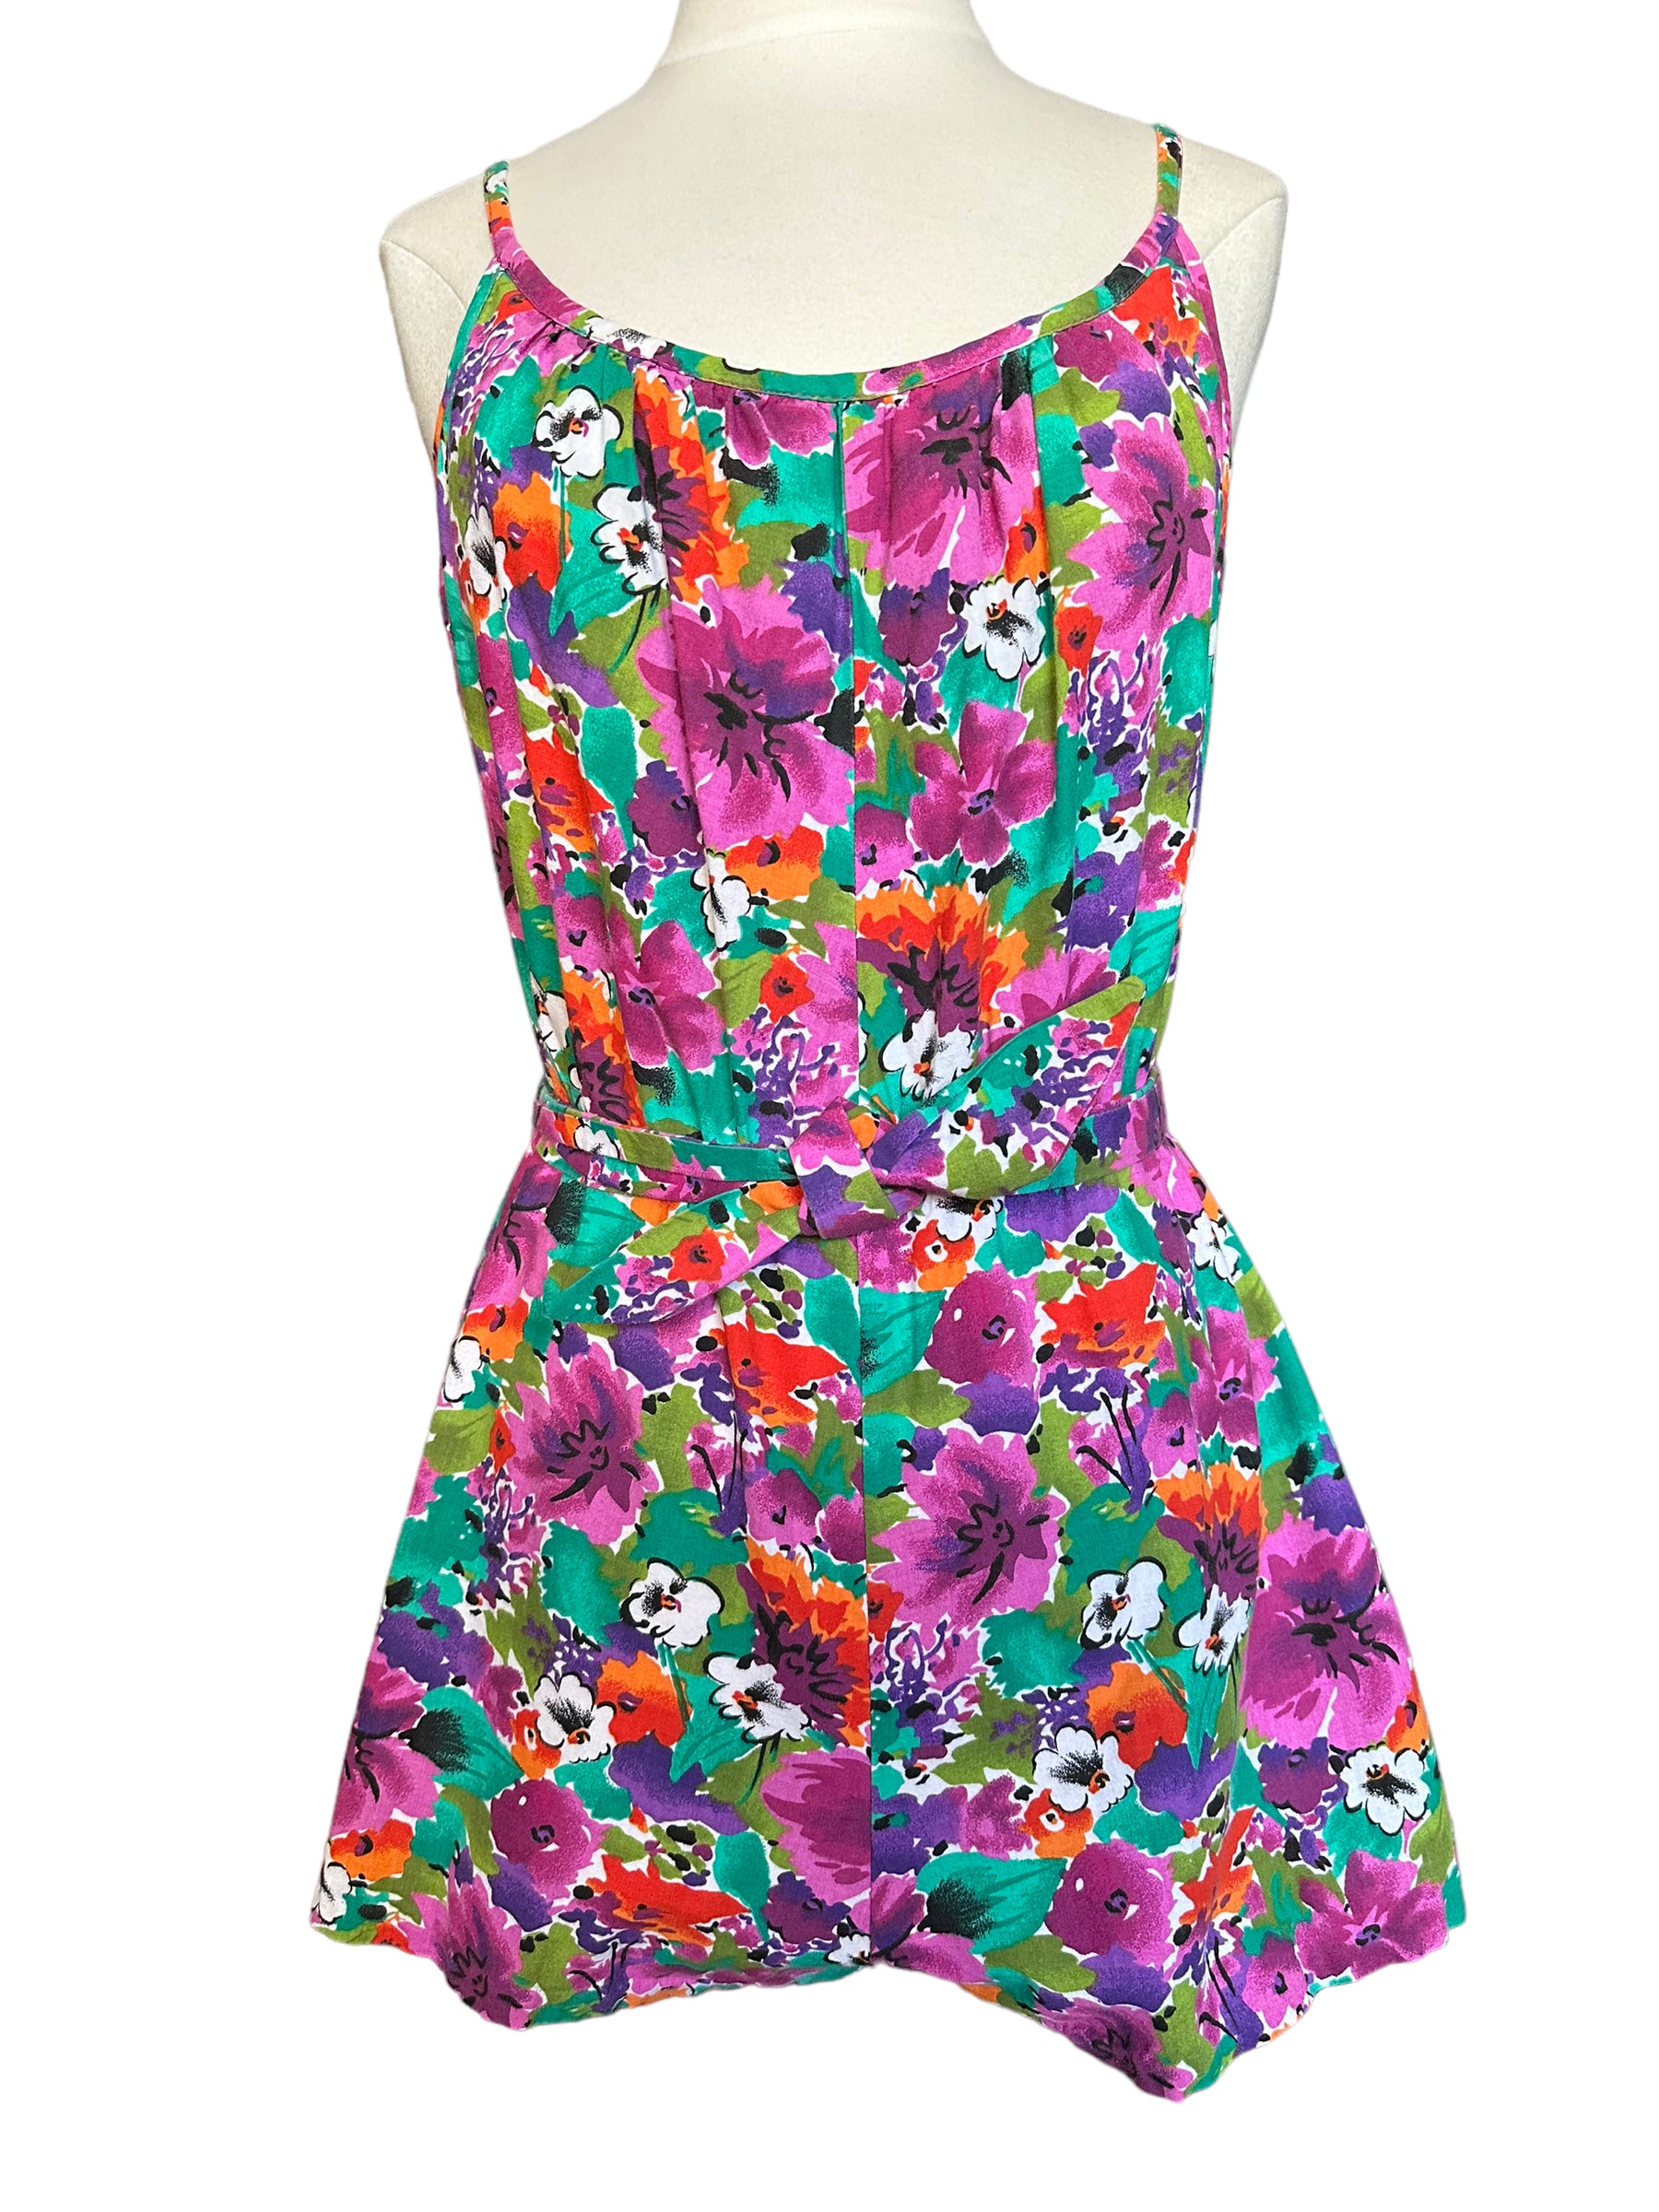 Full front view of Vintage 1980s Catalina Floral Swimsuit | Seattle Vintage Swimwear | Barn Owl True Vintage